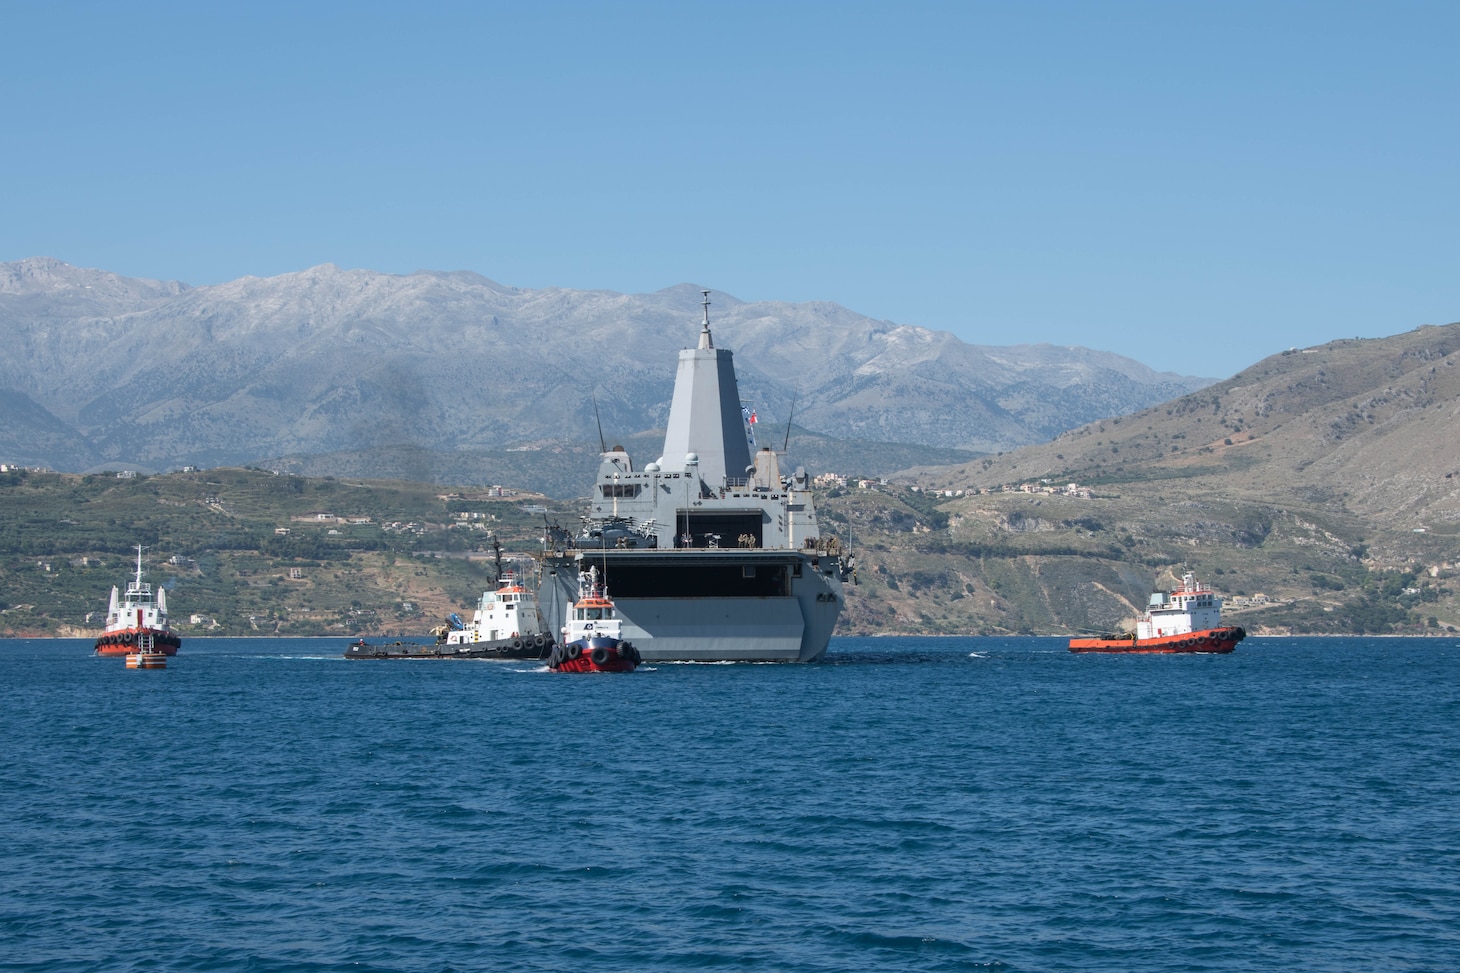 ) The amphibious transport dock ship USS San Antonio (LPD 17) arrives in Souda Bay, Greece, for a scheduled logistics and maintenance stop , May 27, 2021. San Antonio is operating in the U.S. Sixth Fleet area of operations with Amphibious Squadron 4 and the 24th Marine Expeditionary Unit (MEU) as part of the Iwo Jima Amphibious Readiness Group. NSA Souda Bay is an operational ashore base that enables U.S., allied, and partner nation forces to be where they are needed when they are needed to ensure security and stability in Europe, Africa, and Southwest Asia.